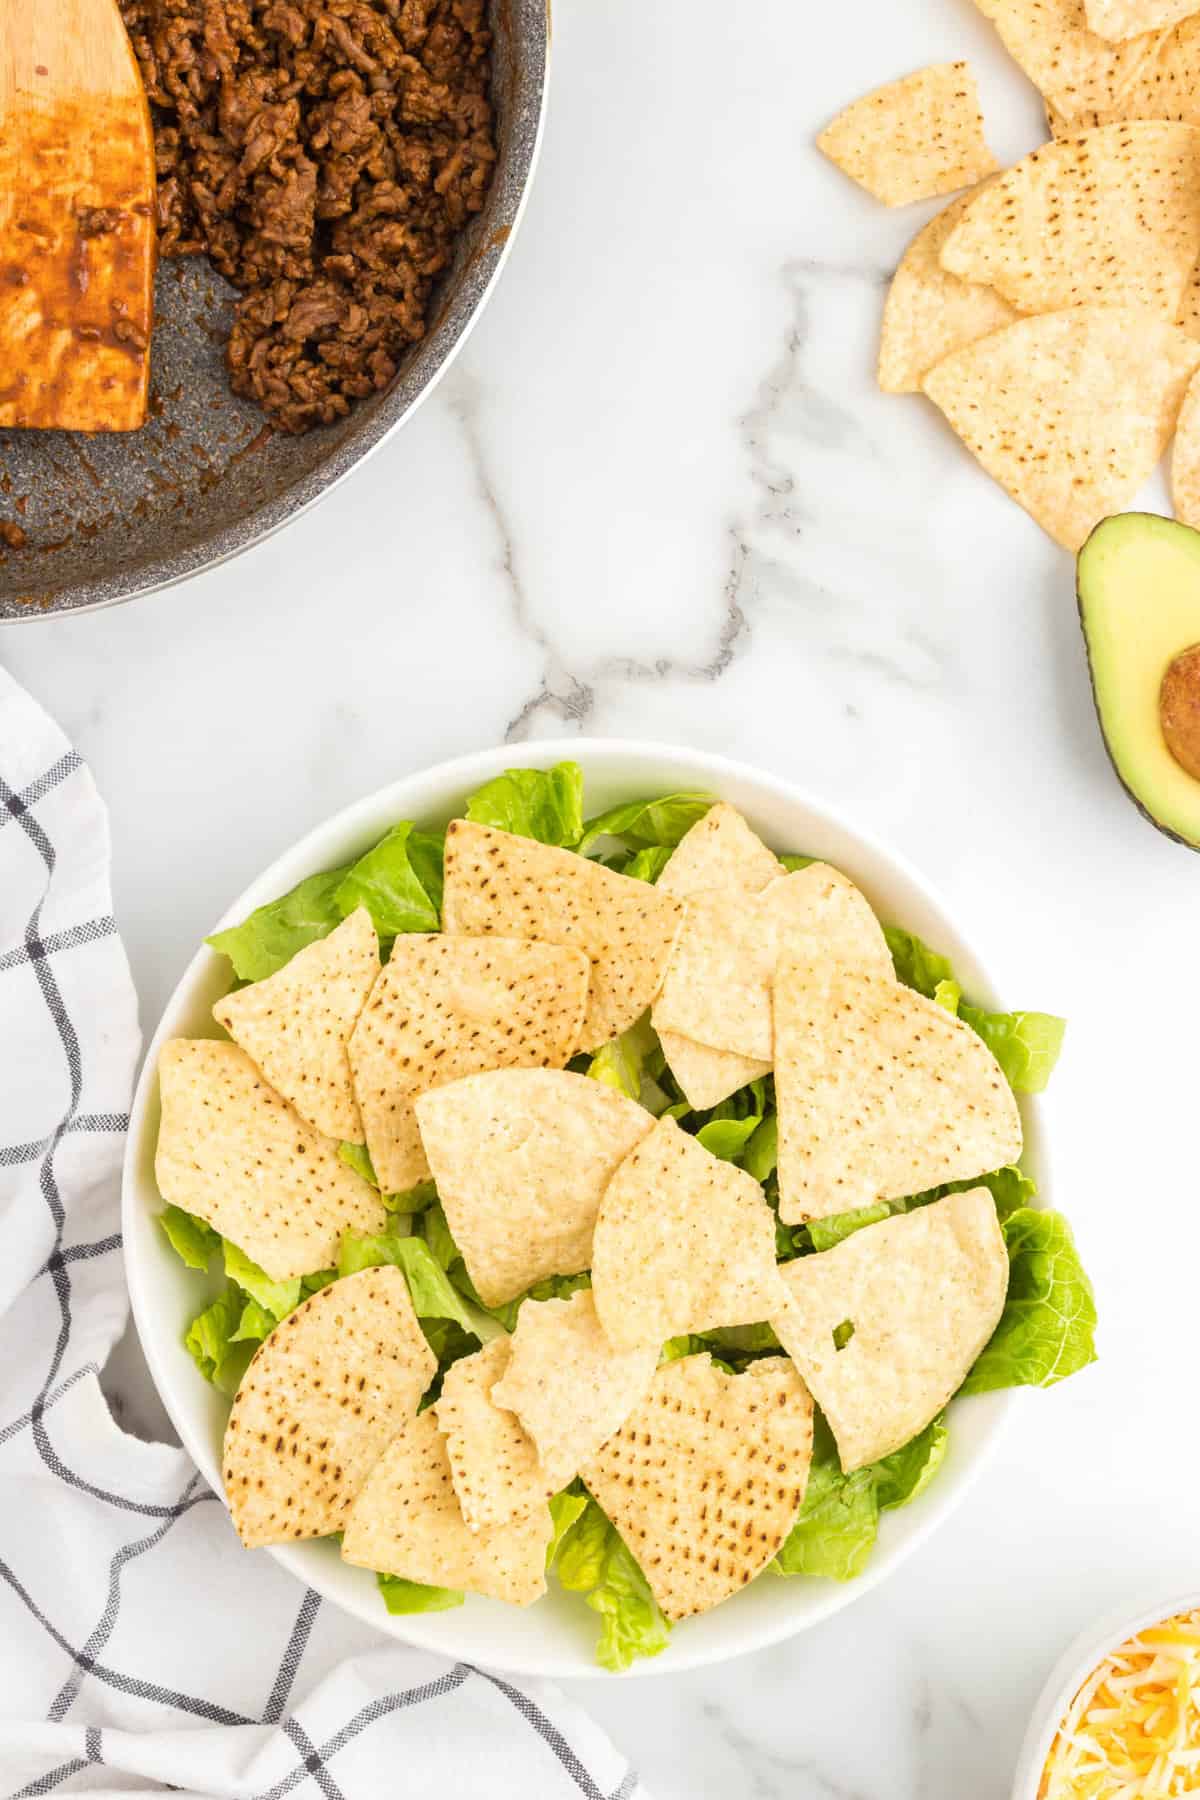 Topping lettuce with tortilla chips in bowl for taco salad